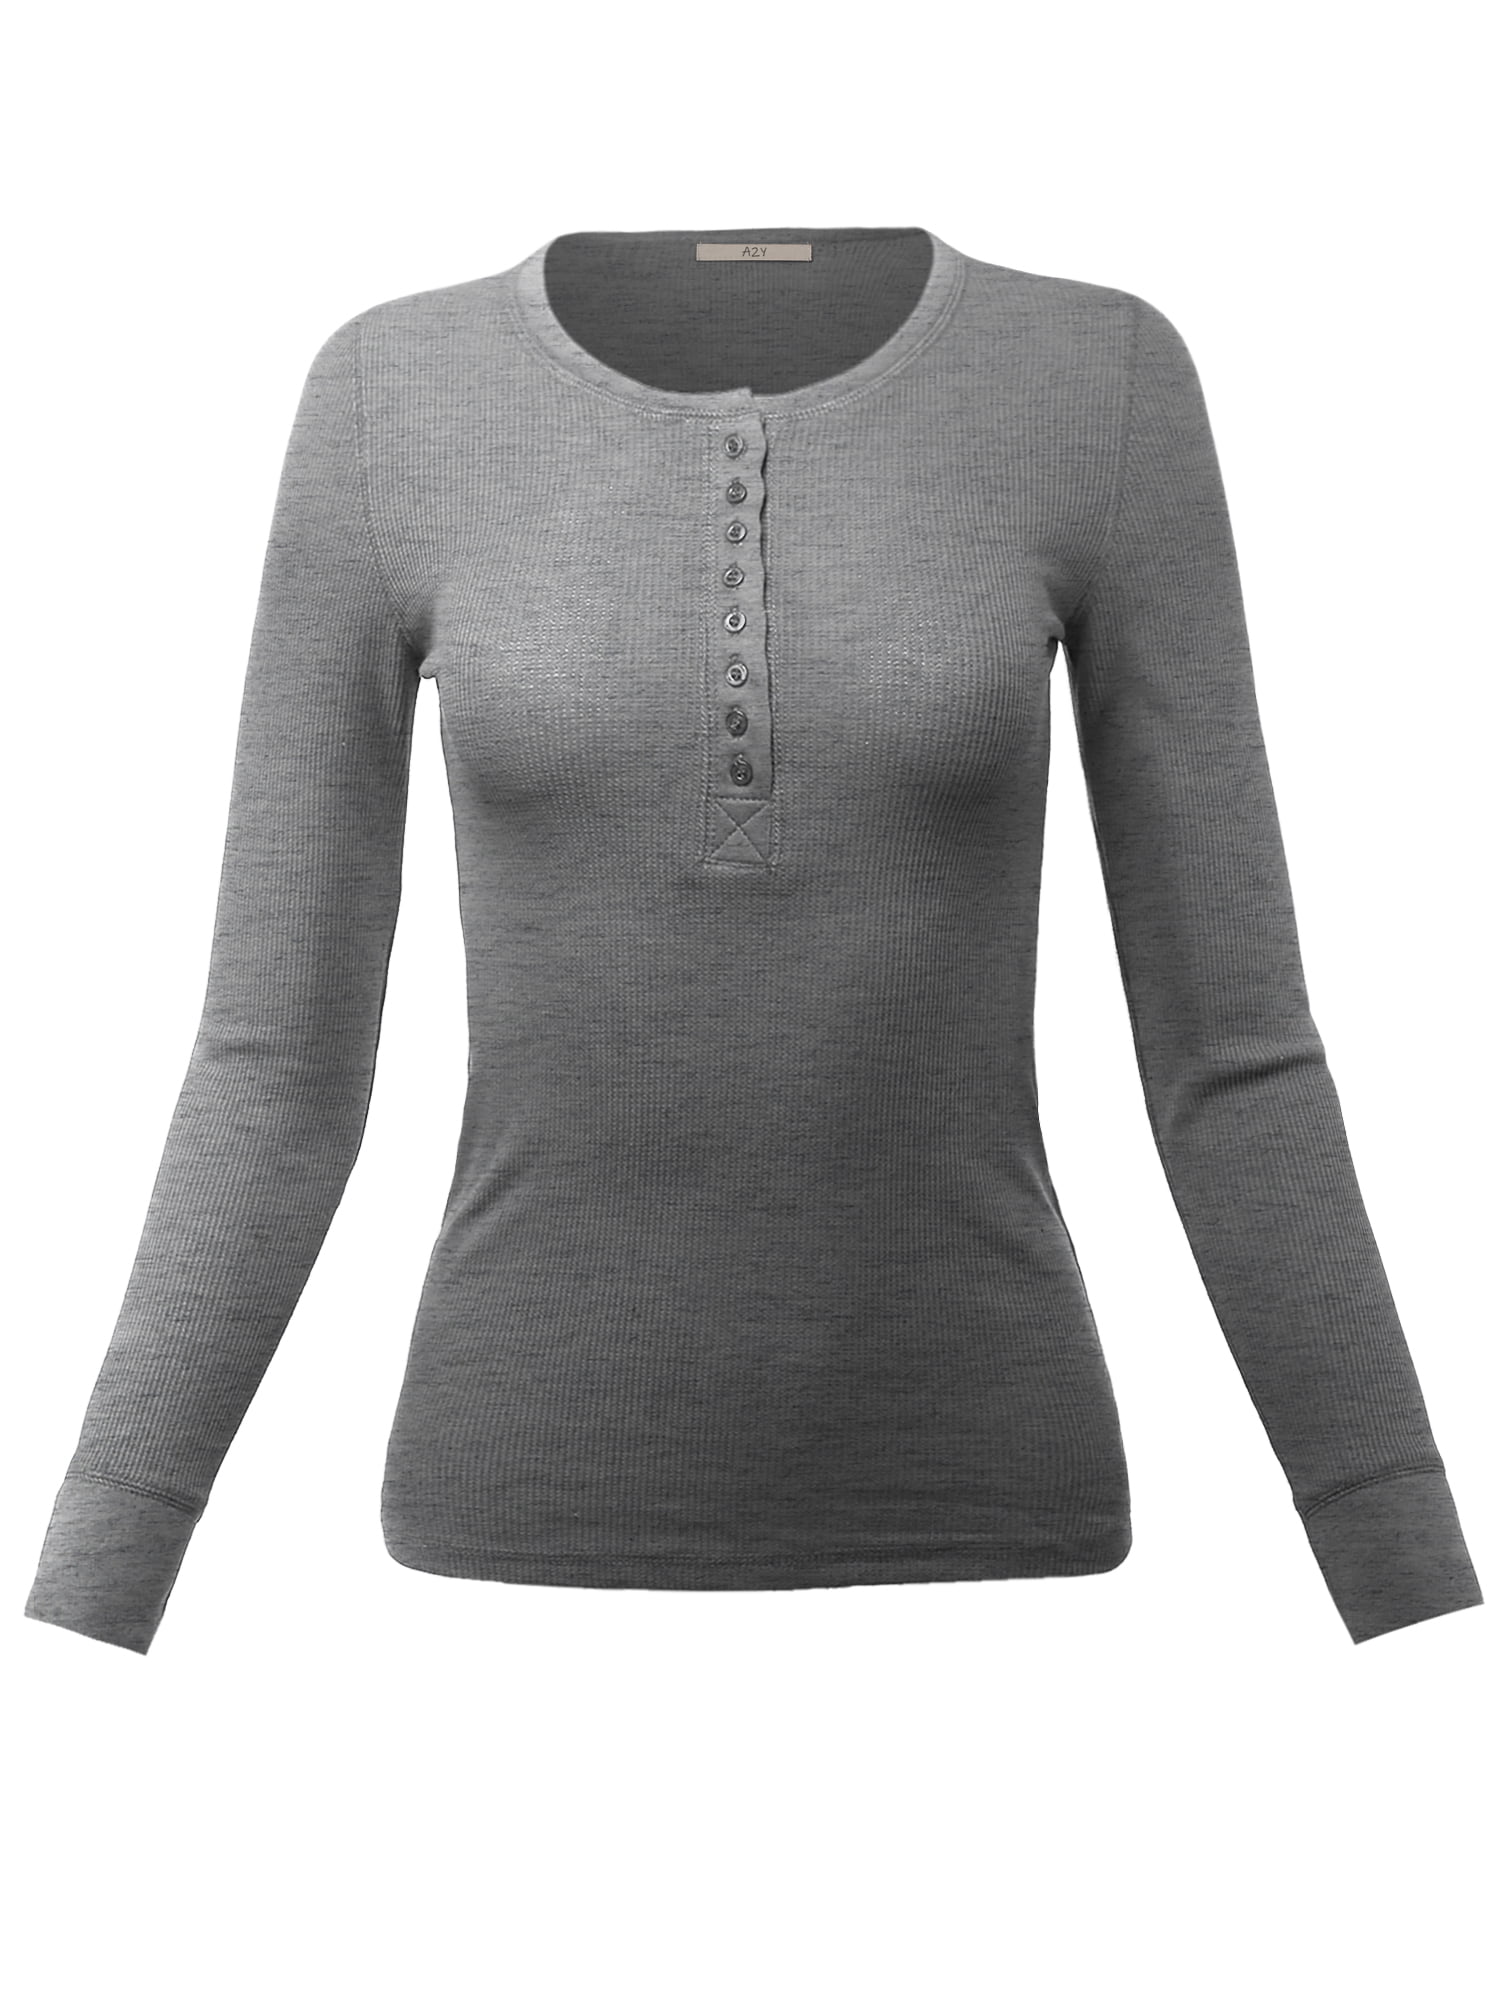 A2Y Women's Fitted Henley Crew Neck Long Sleeve Thermal Top New Heather ...